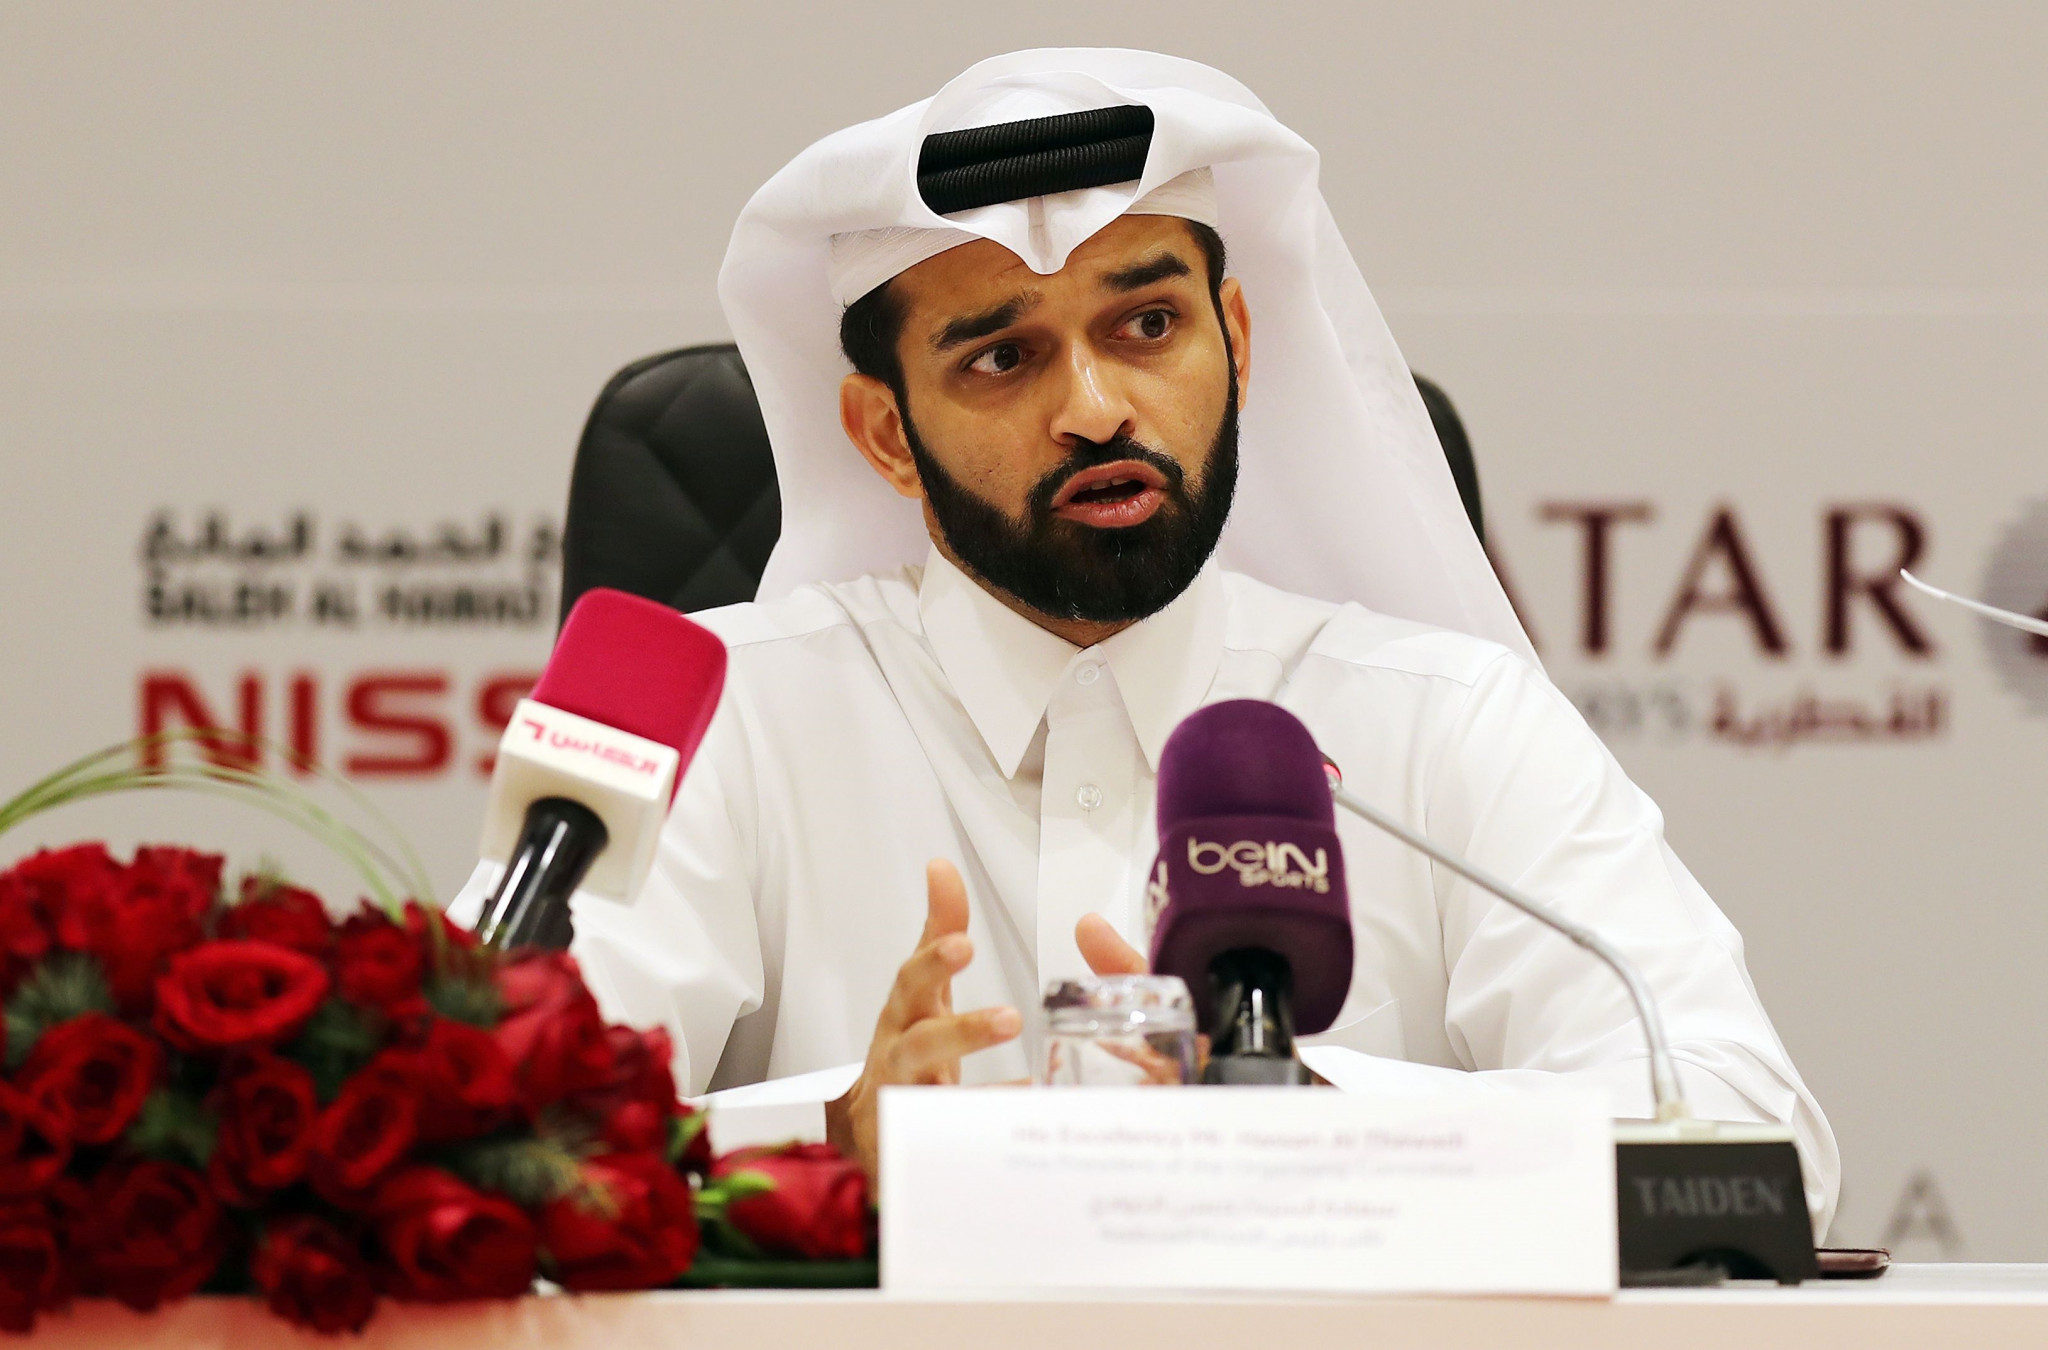 UK Sports Minister and Qatar 2022 official to speak at trade event during Birmingham 2022